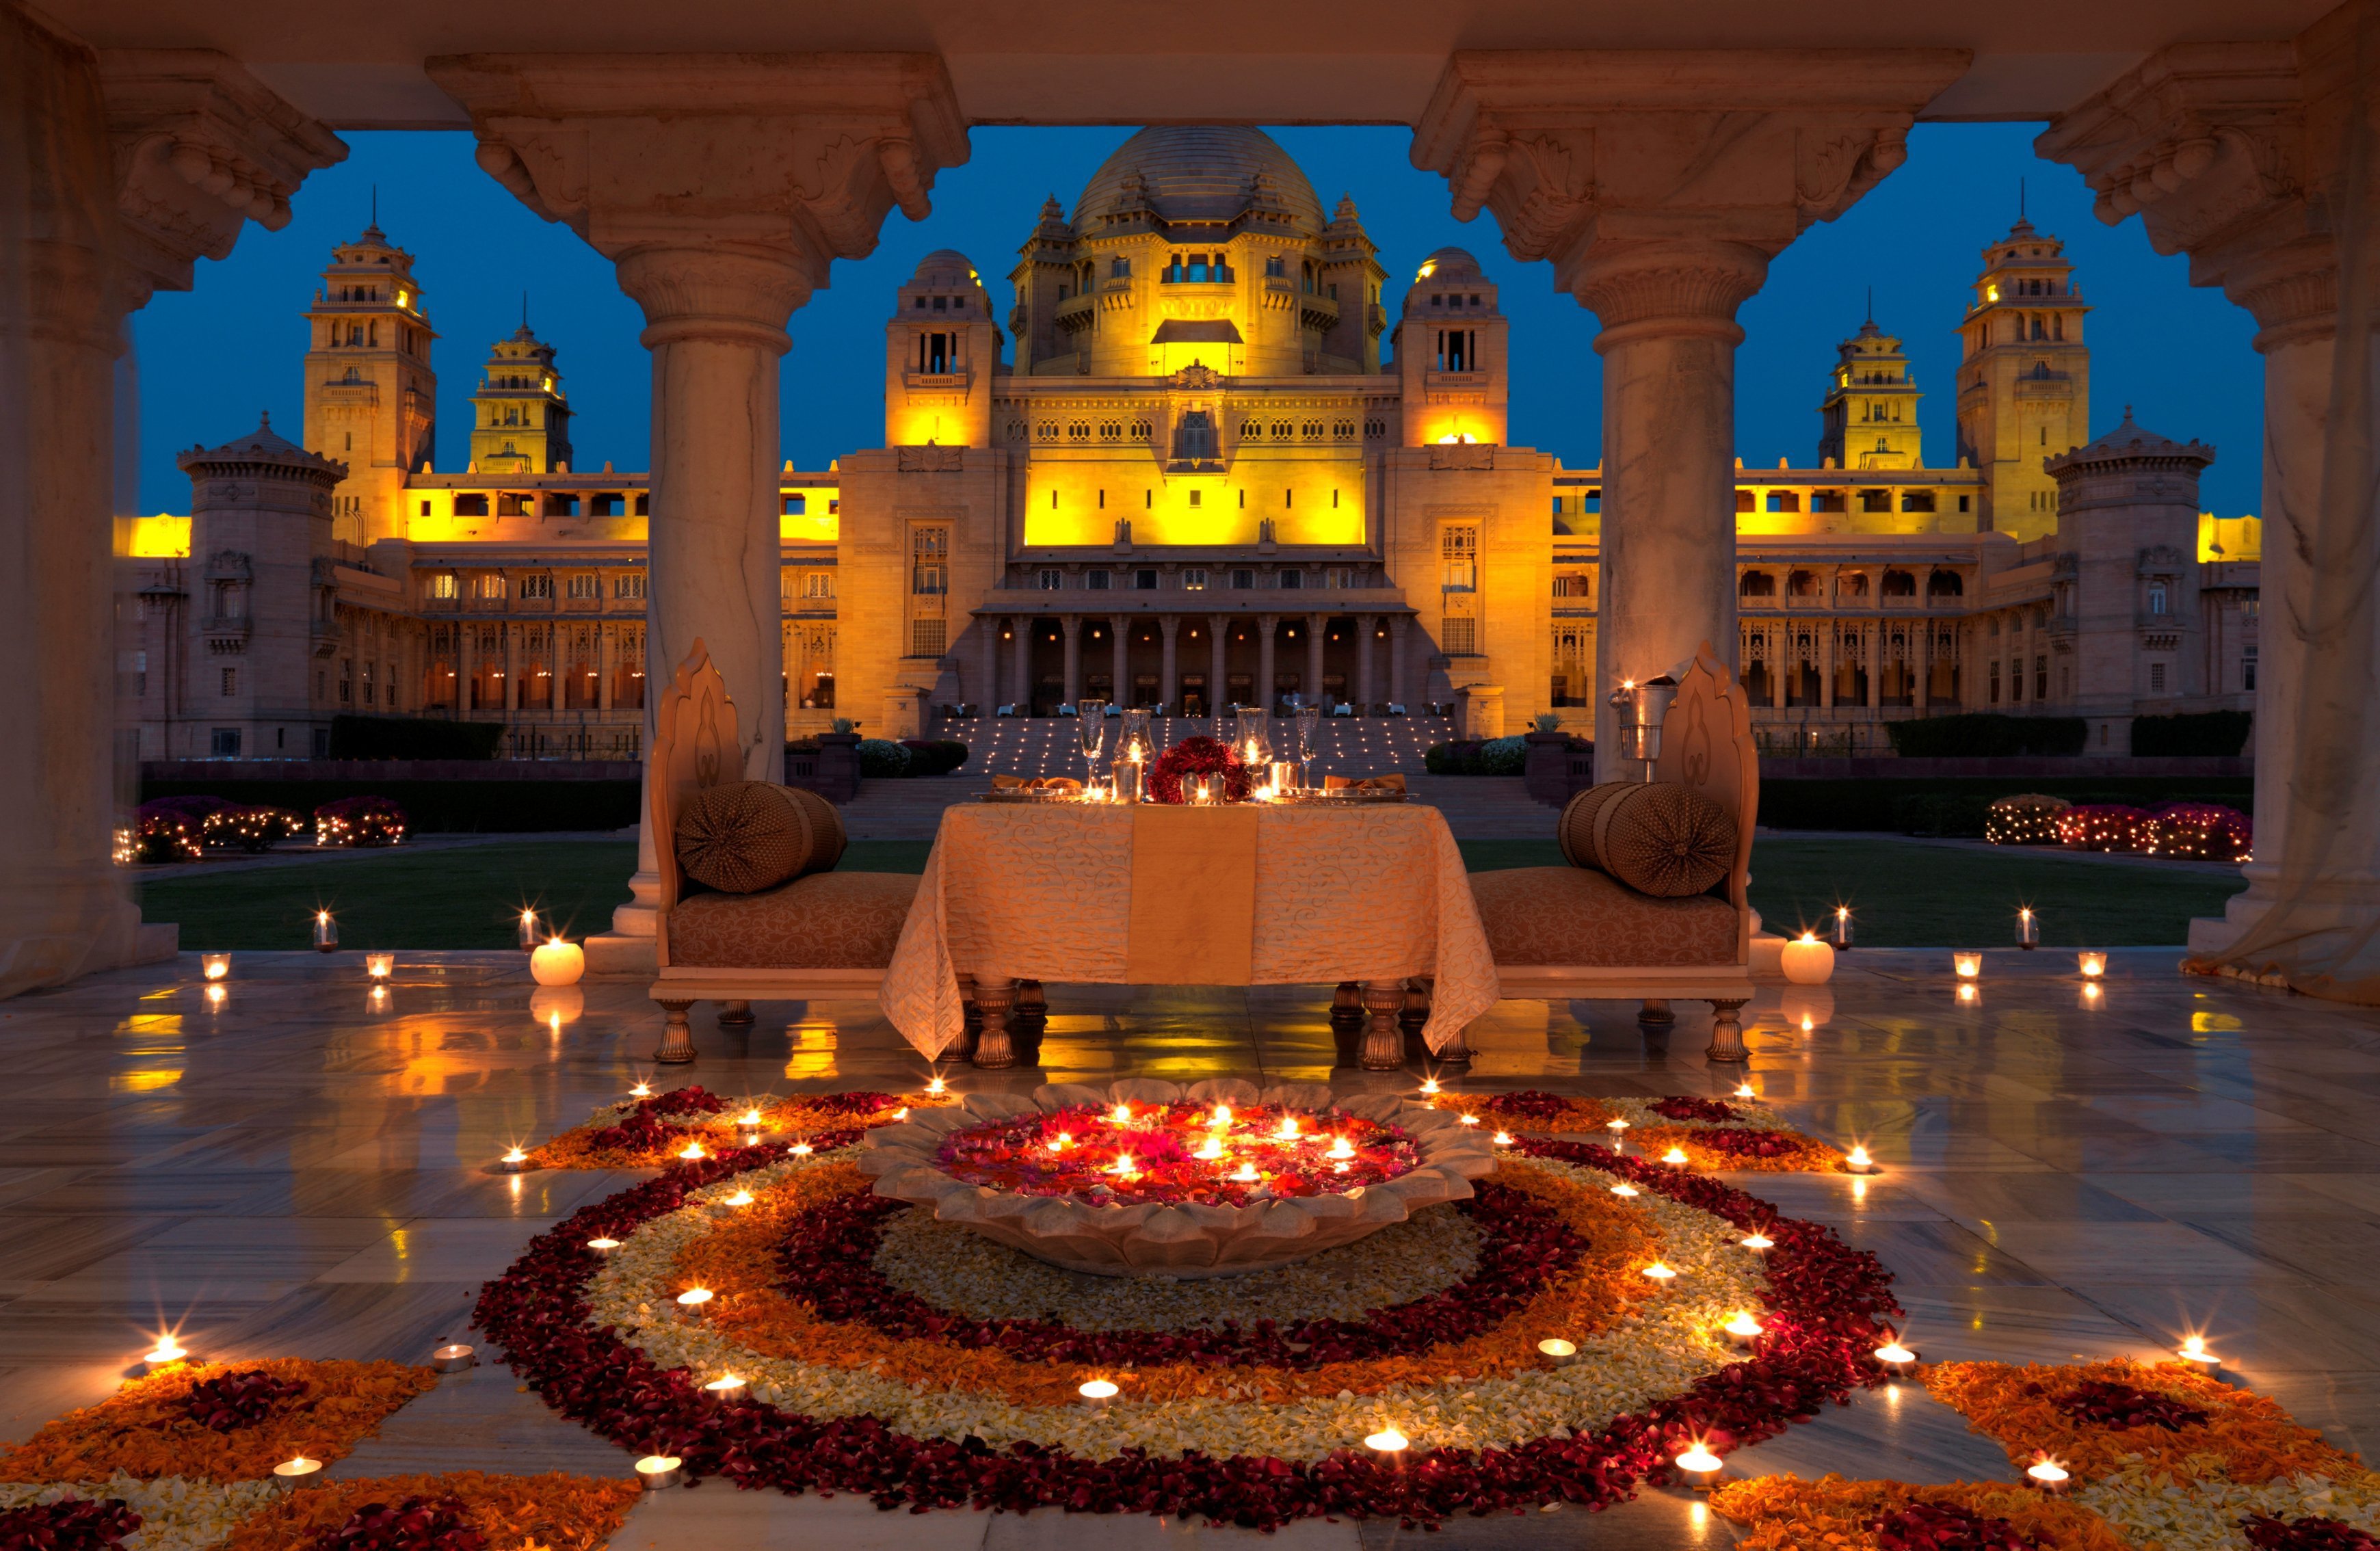 15 Majestic Palaces In India That Redefine The Word 'Grand'